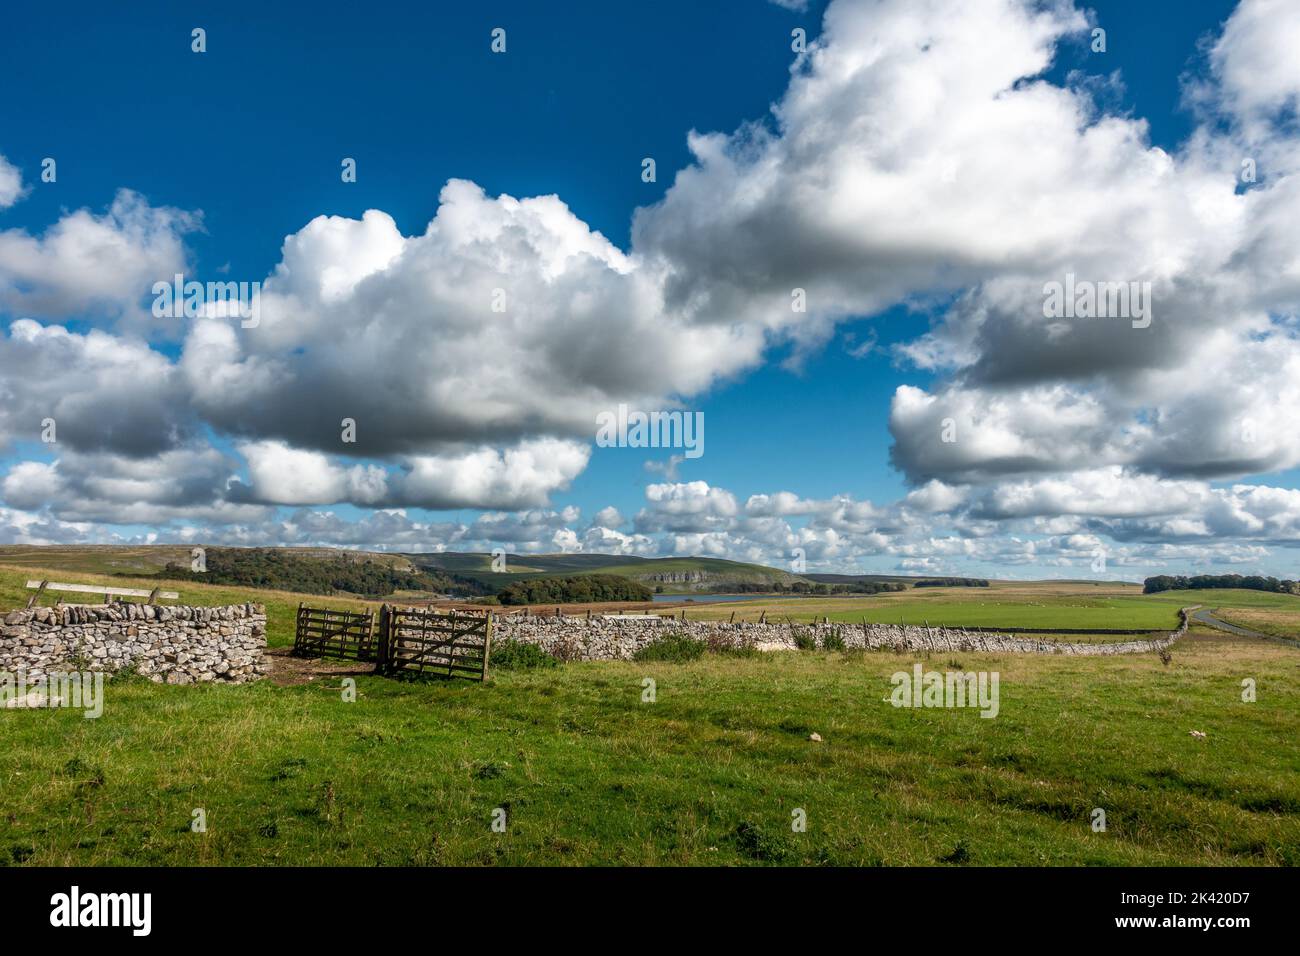 Stunning view of Malham Moor looking at Malham Tarn through an open gate with blue skies and sunshine, Yorkshire Dales National Park, England, UK Stock Photo